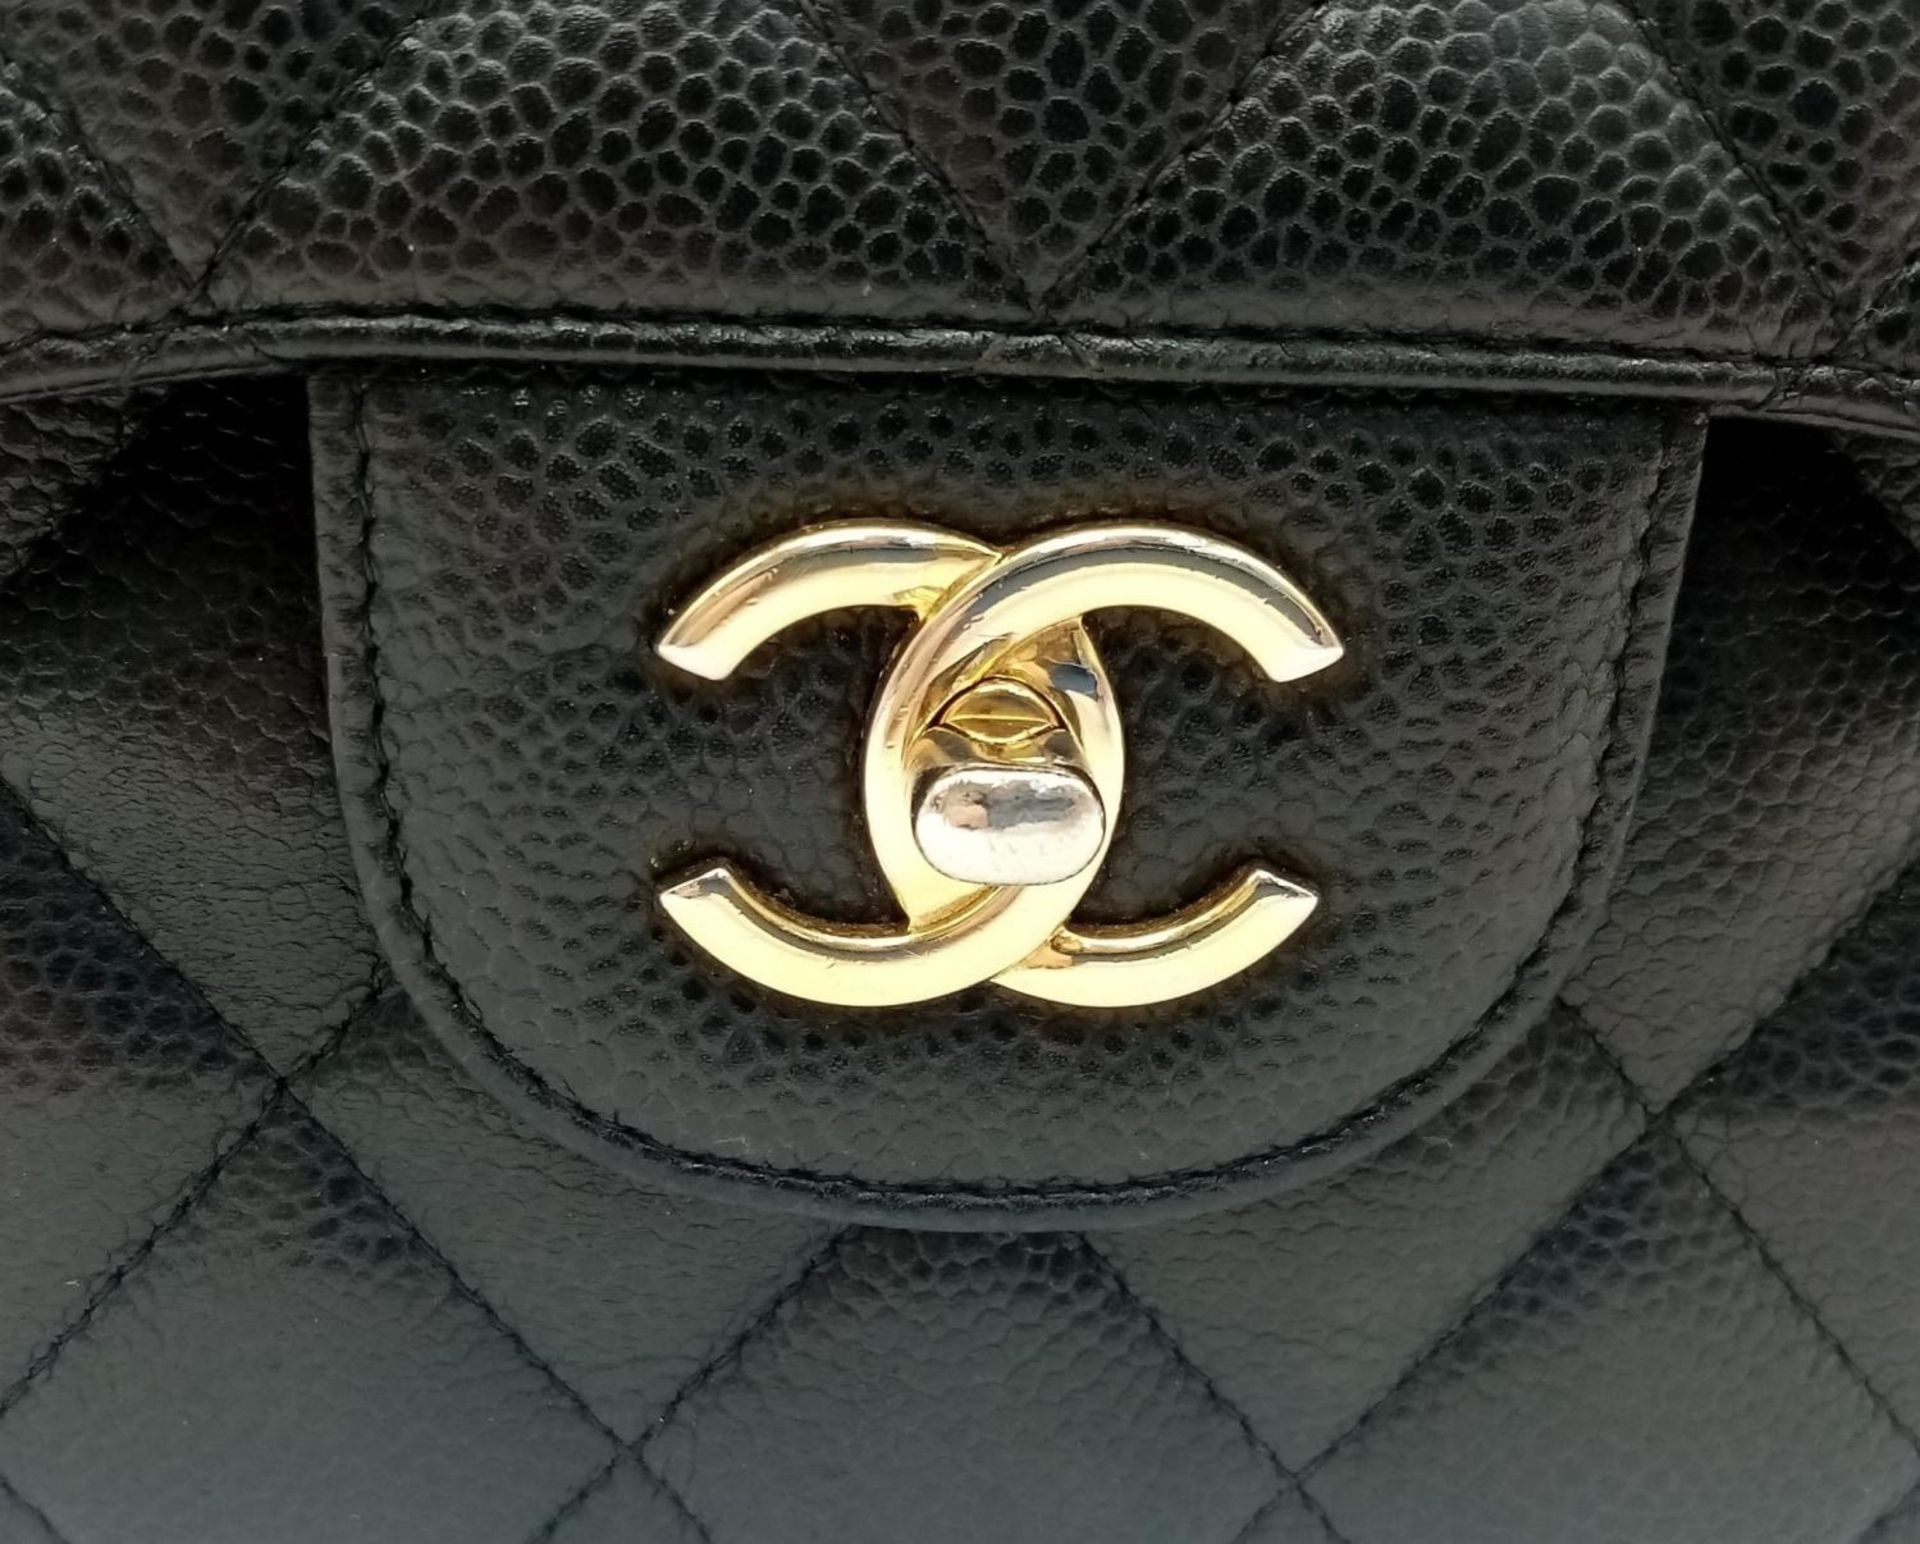 A Chanel Black Caviar Classic Double Flap Bag. Quilted pebbled leather exterior with gold-toned - Image 10 of 11